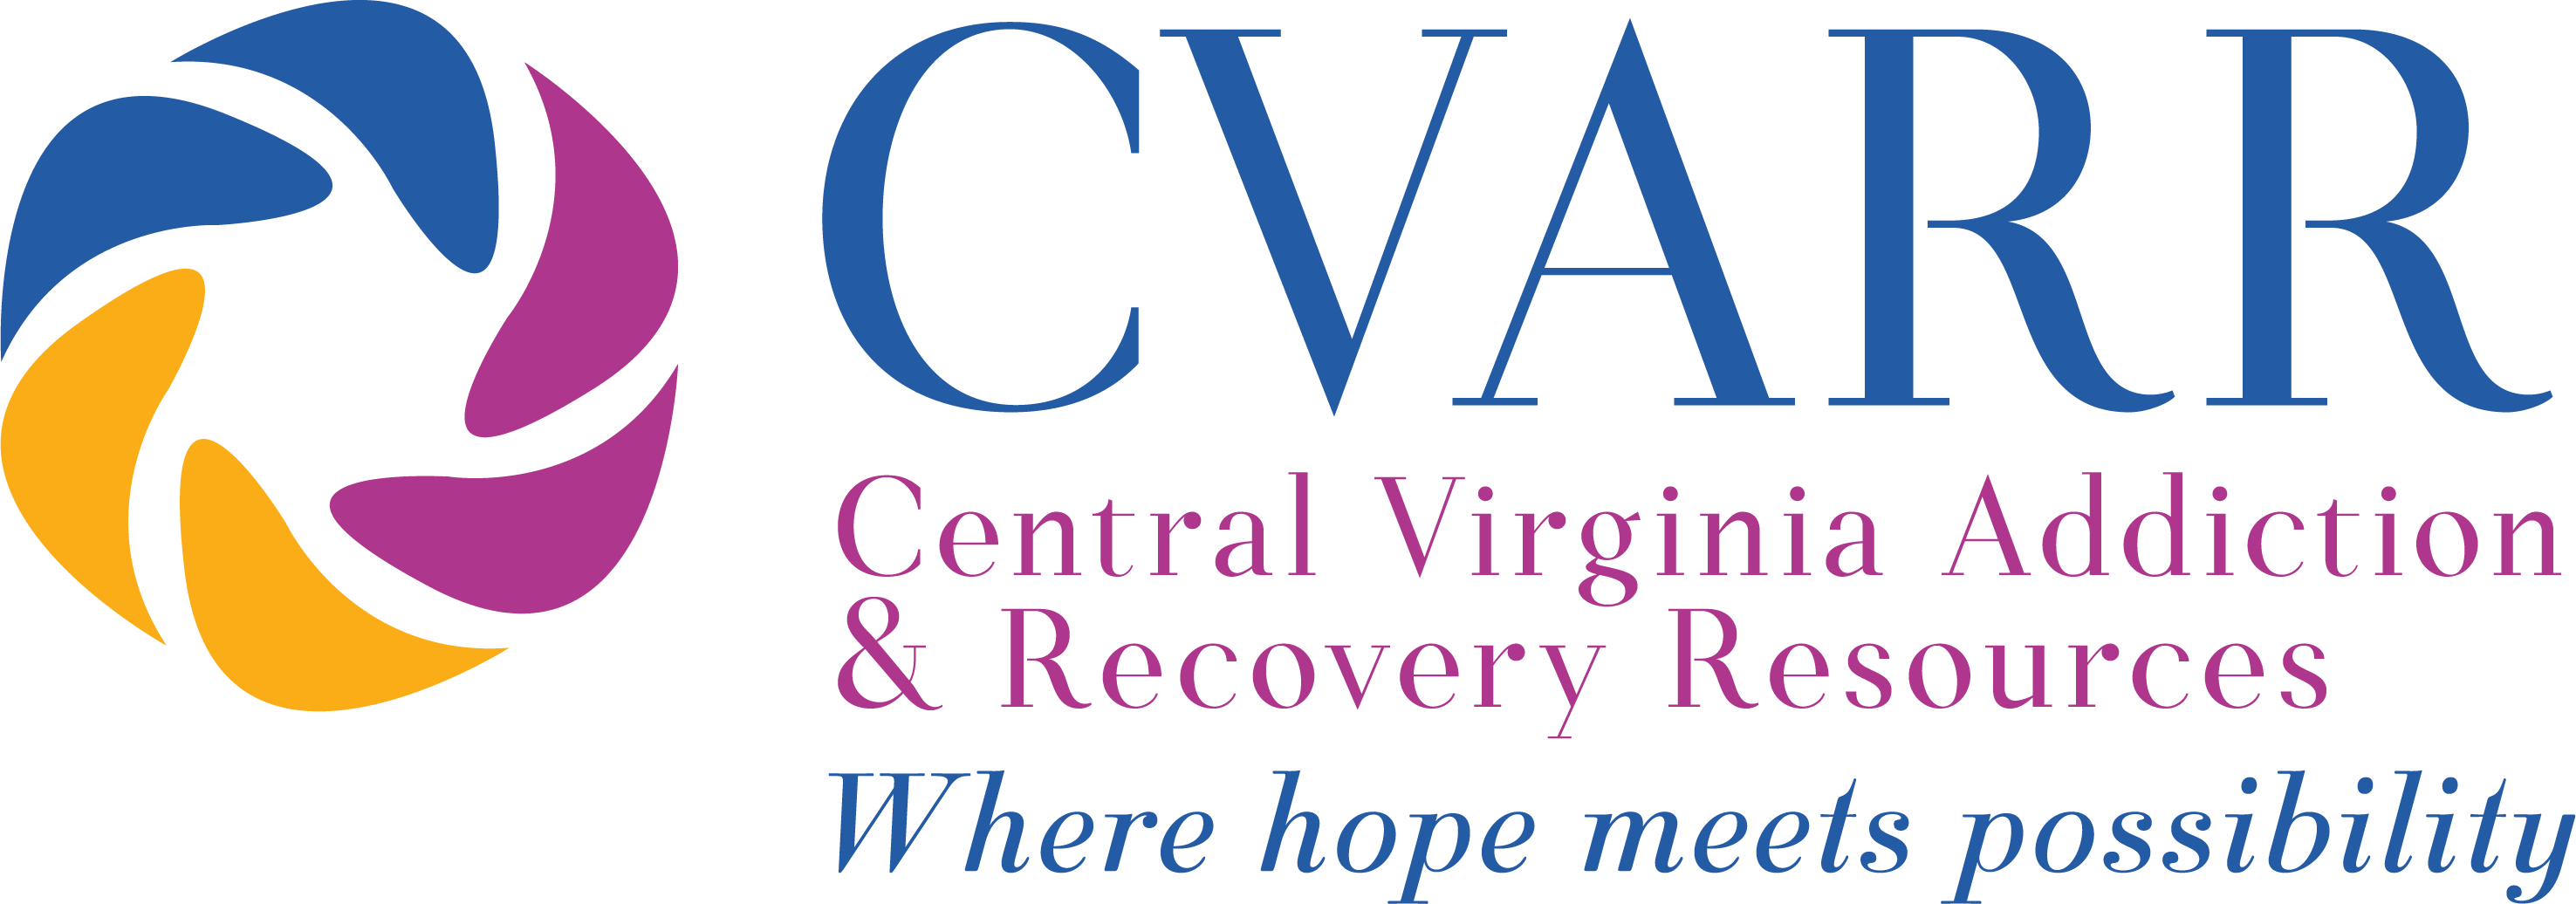 Central Virginia Addiction and Recovery Resources logo